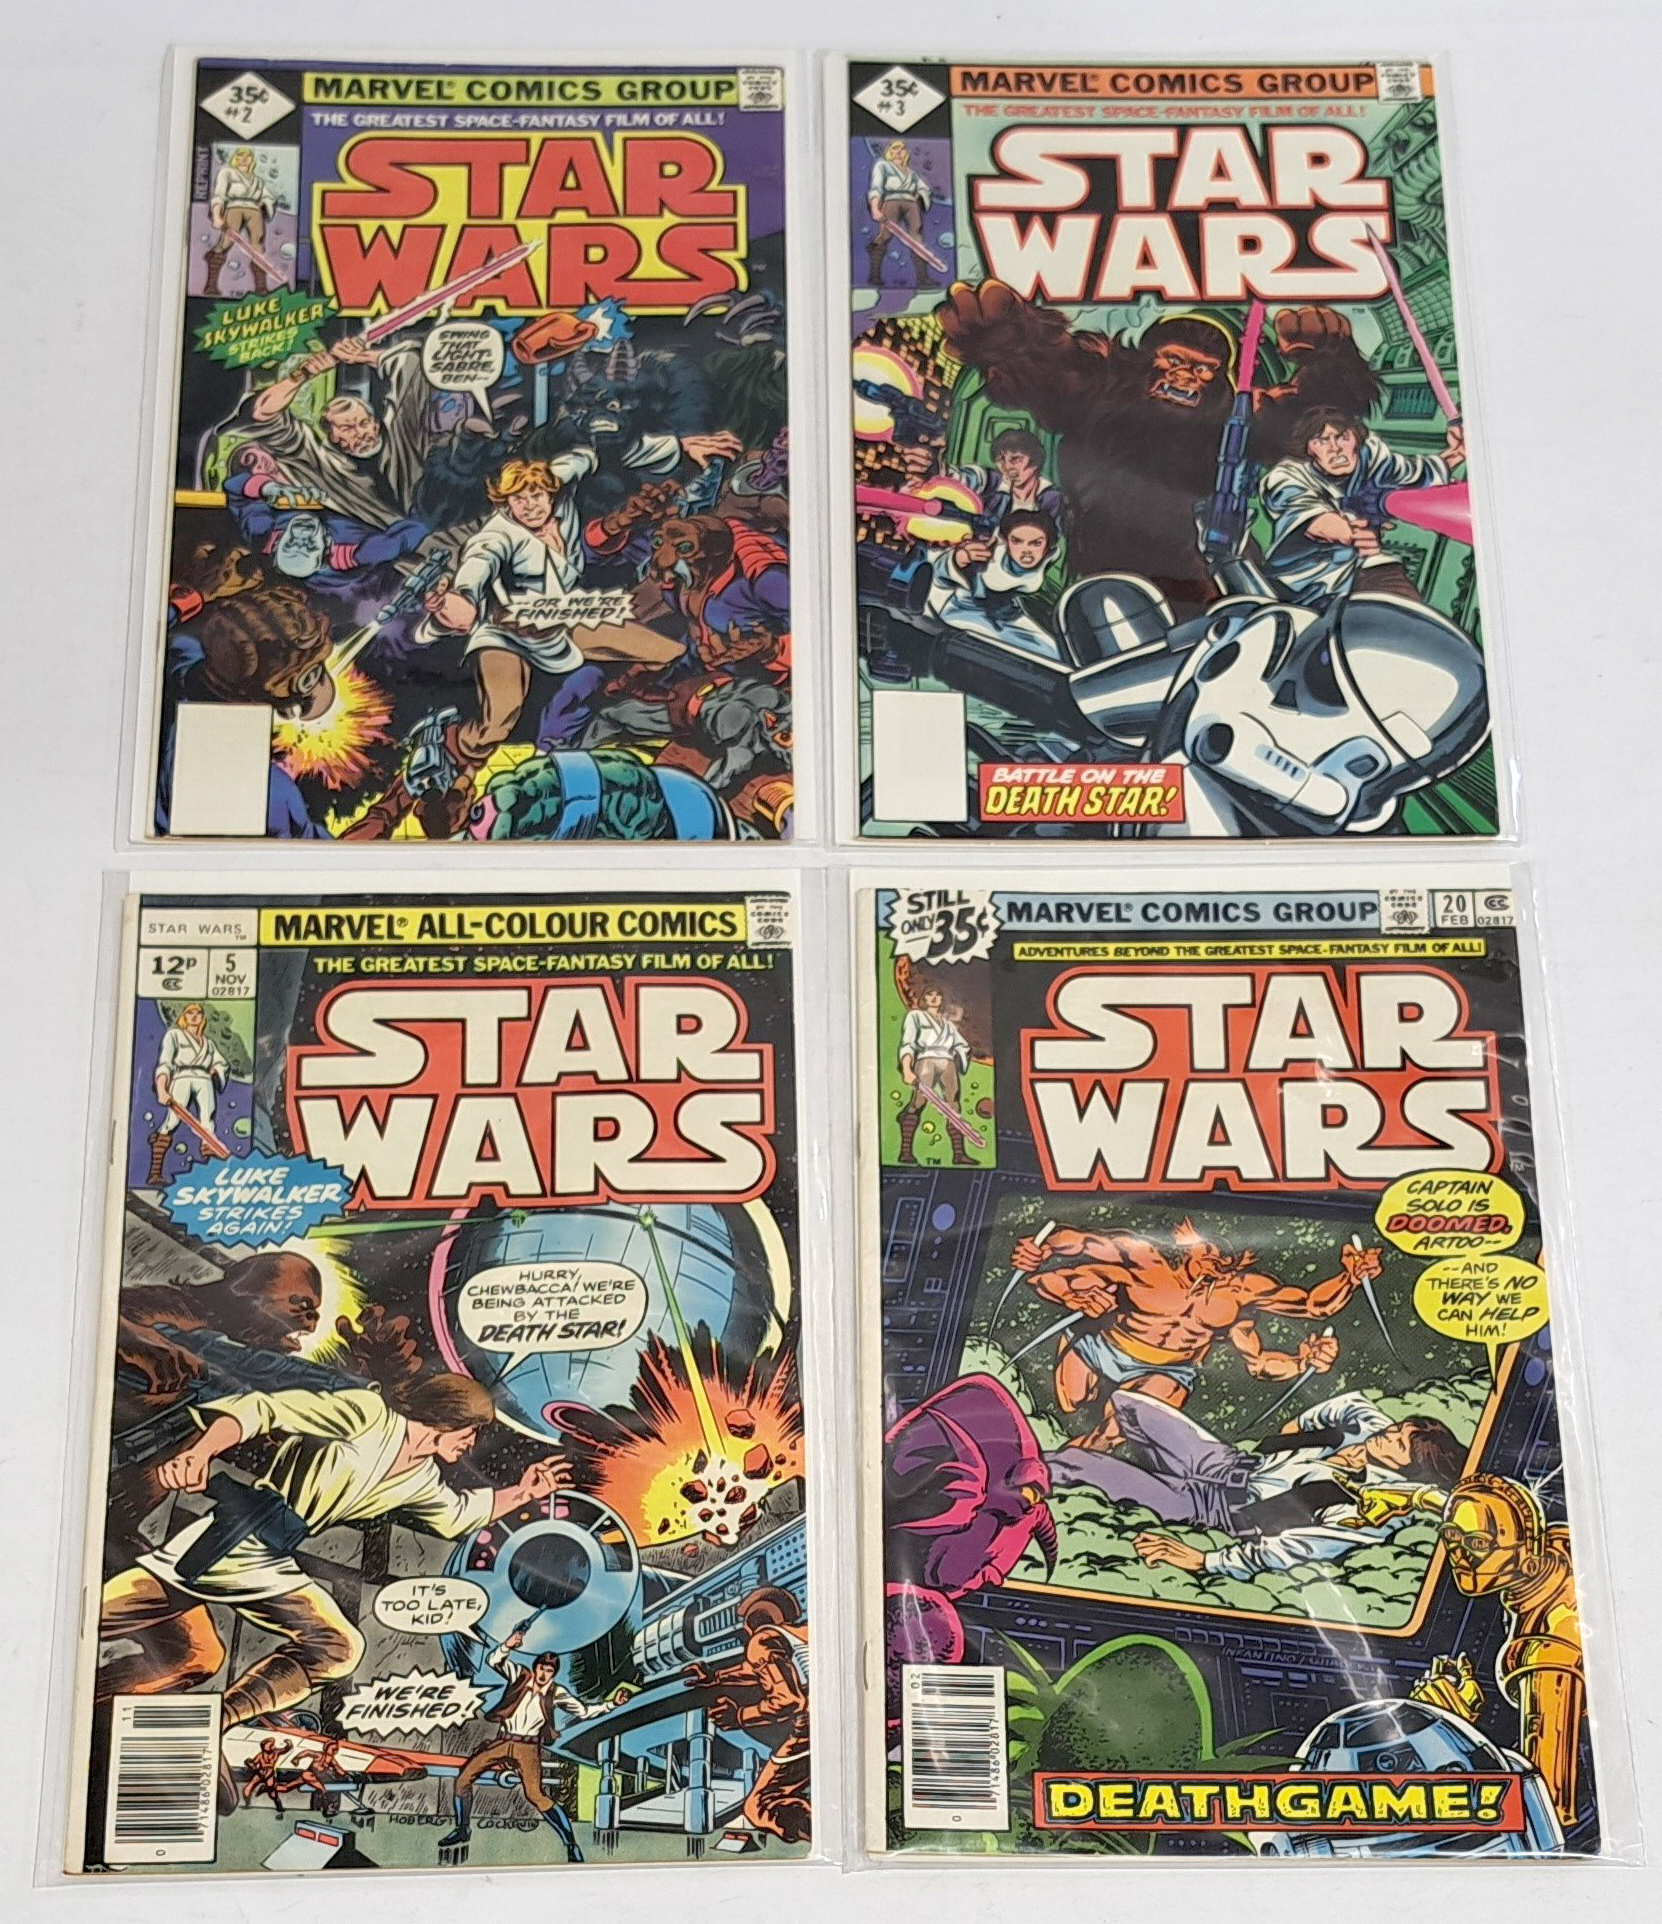 Quantity of Star Wars & similar, Magazines, Comics, Annuals & related publications - Image 2 of 3